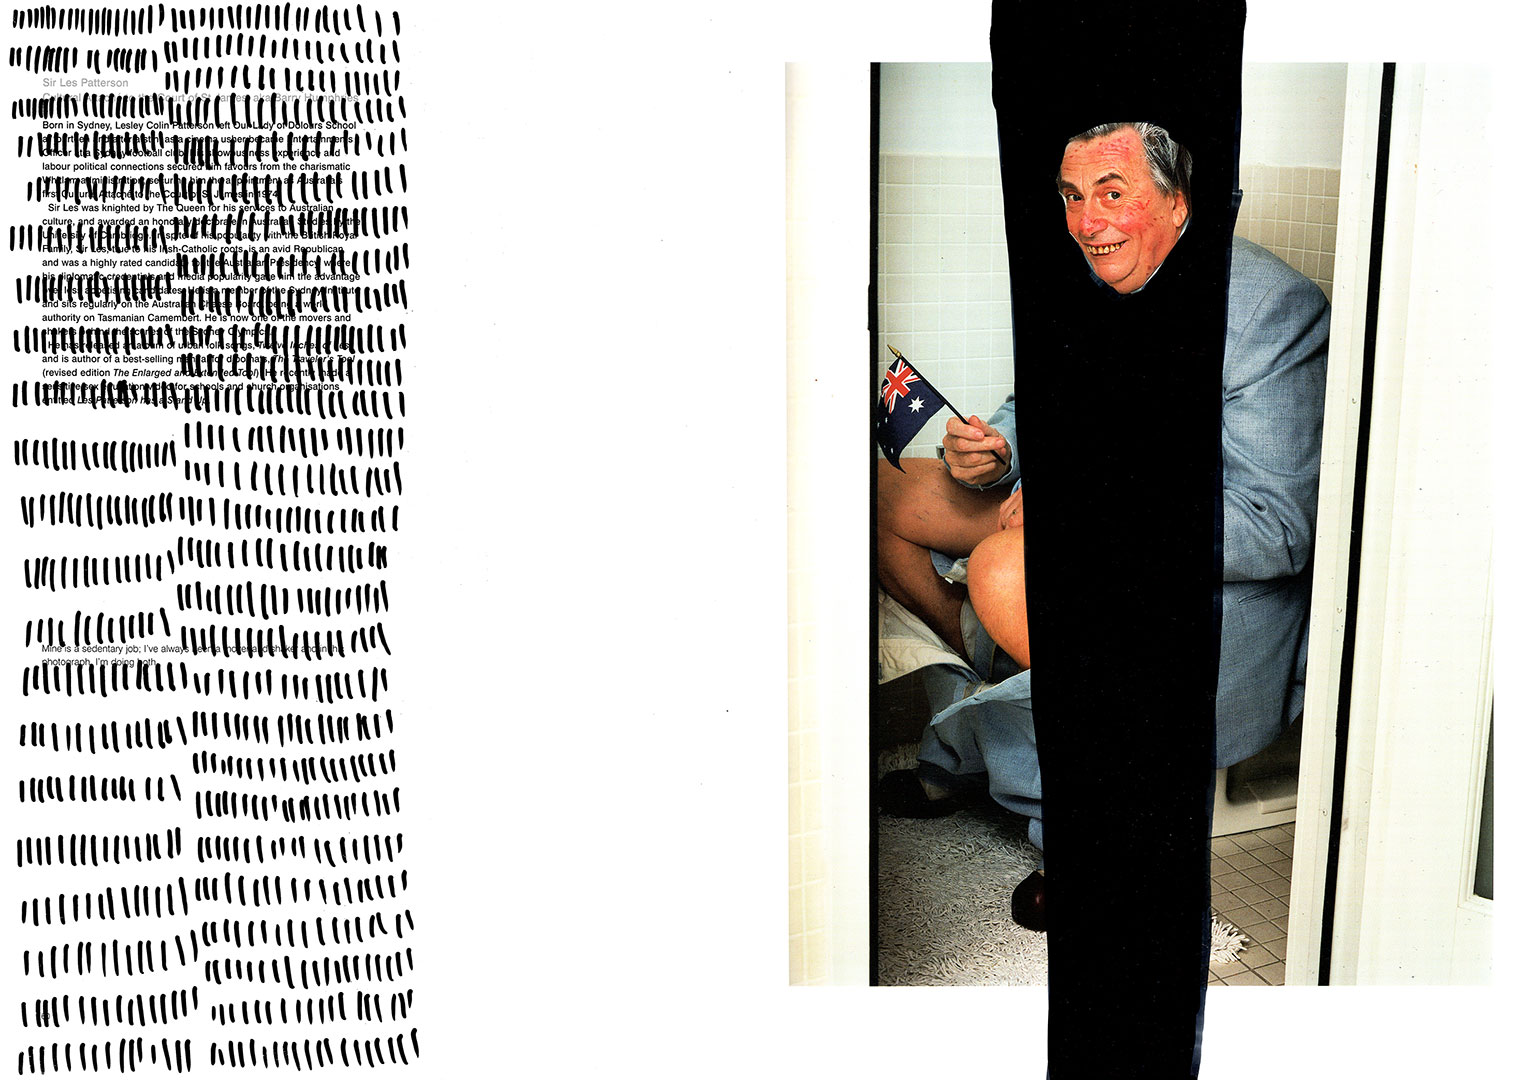 Dean CROSS 'PolyAustralis #26 (Sir Les Patterson)' 2016 | Hahnmule archival cotton photorag | QUT Art Collection | Purchased 2016 | Original image by Polly Borland